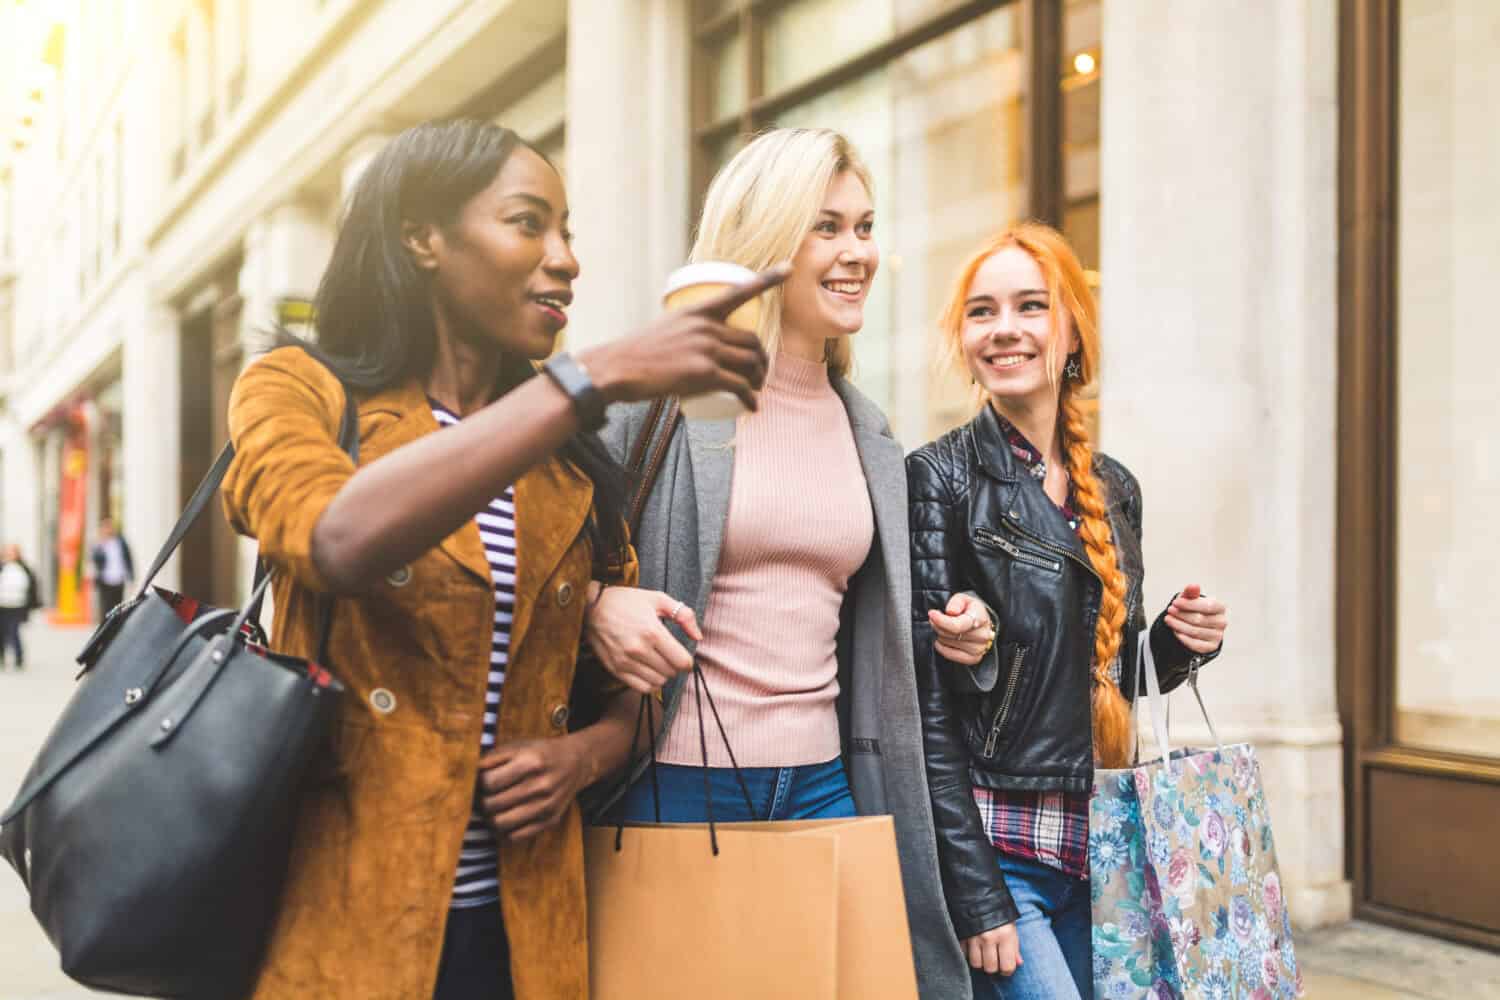 Multiracial group of women shopping and walking in London. Three girls, mixed race group, having fun in the city while shopping. Best friends sharing happy moments together